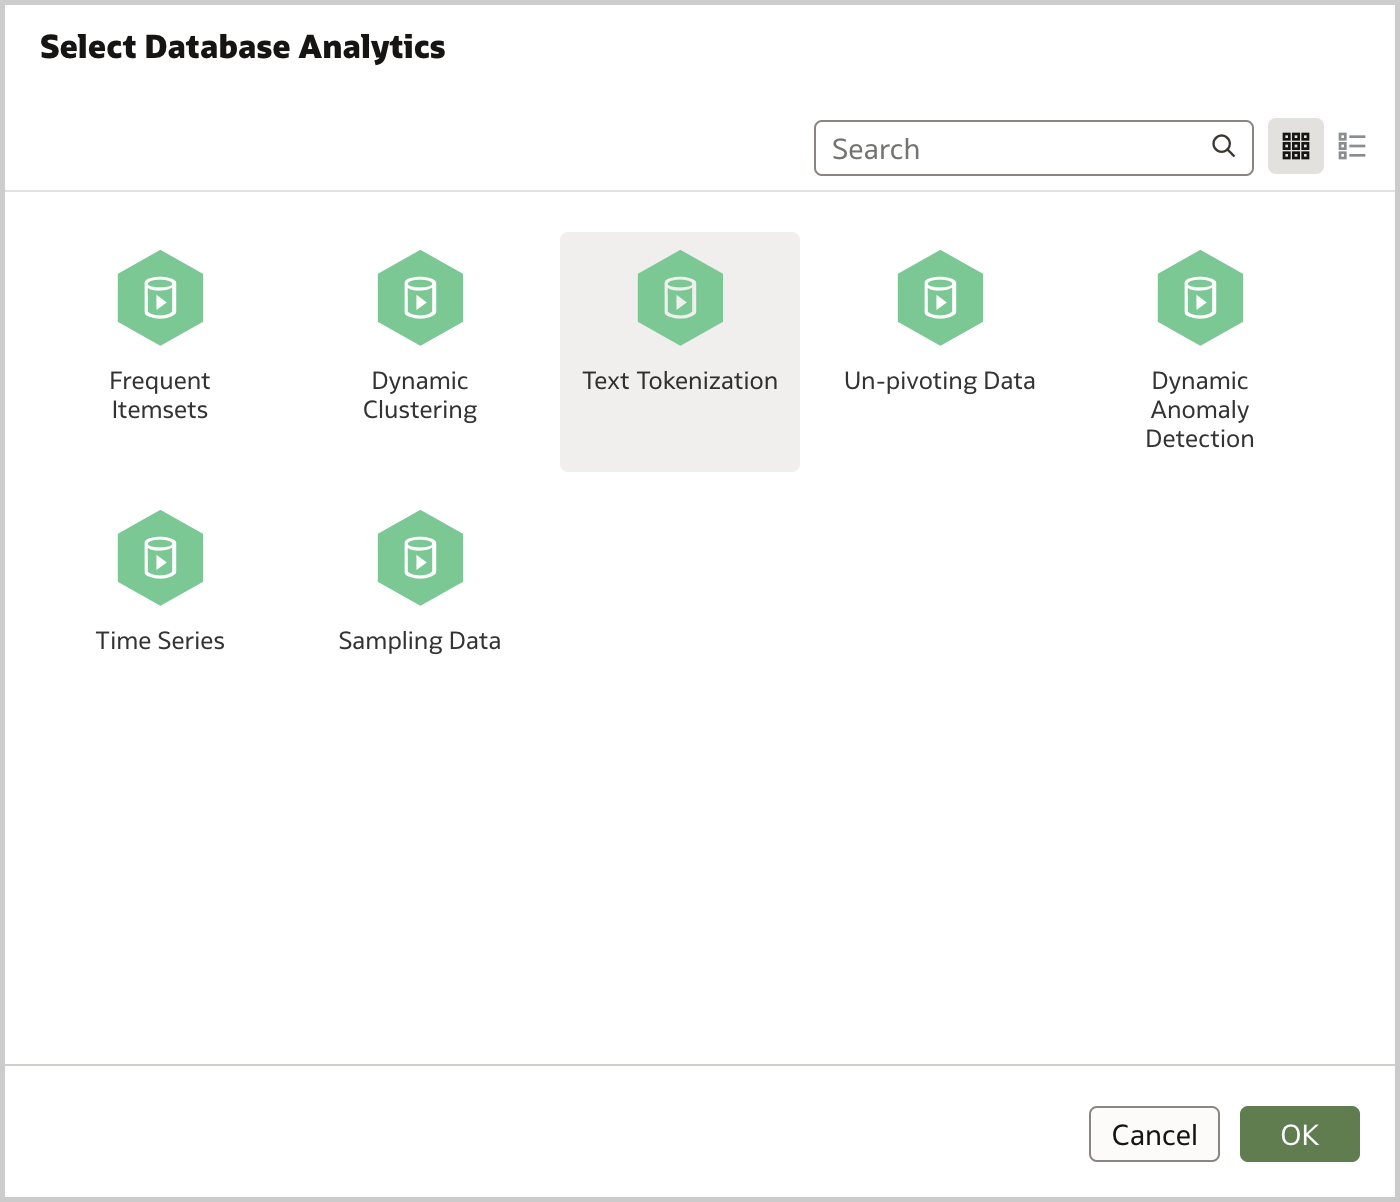 The Database Analytics step allows to use several database analytics functions in a data flow.